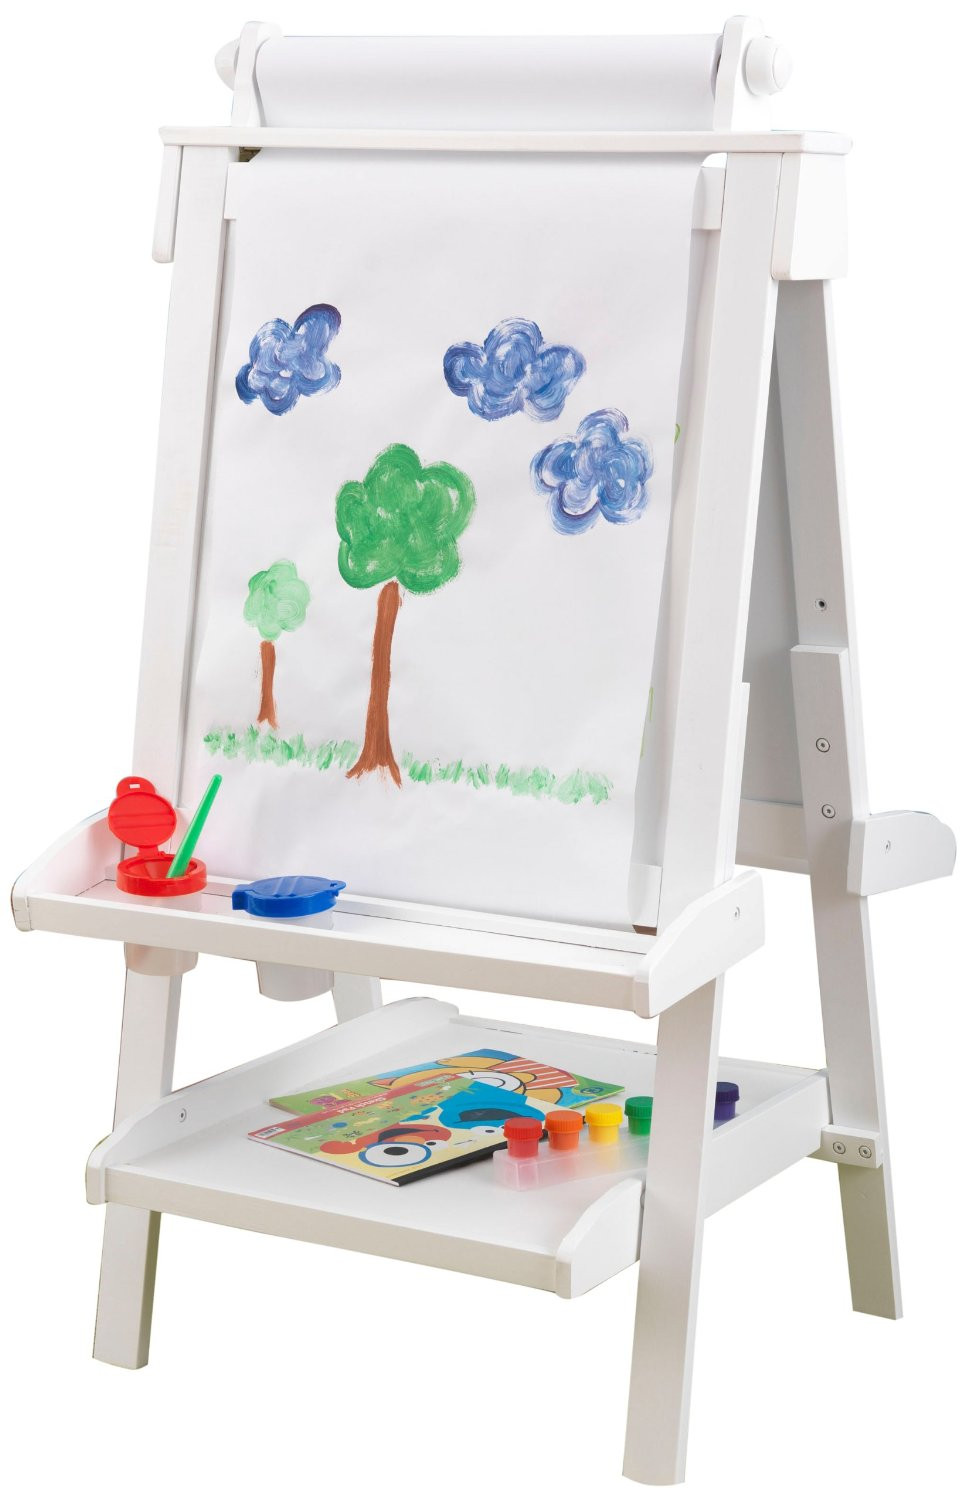 Kids Craft Easel
 Best Kids Easel What Are The Choices